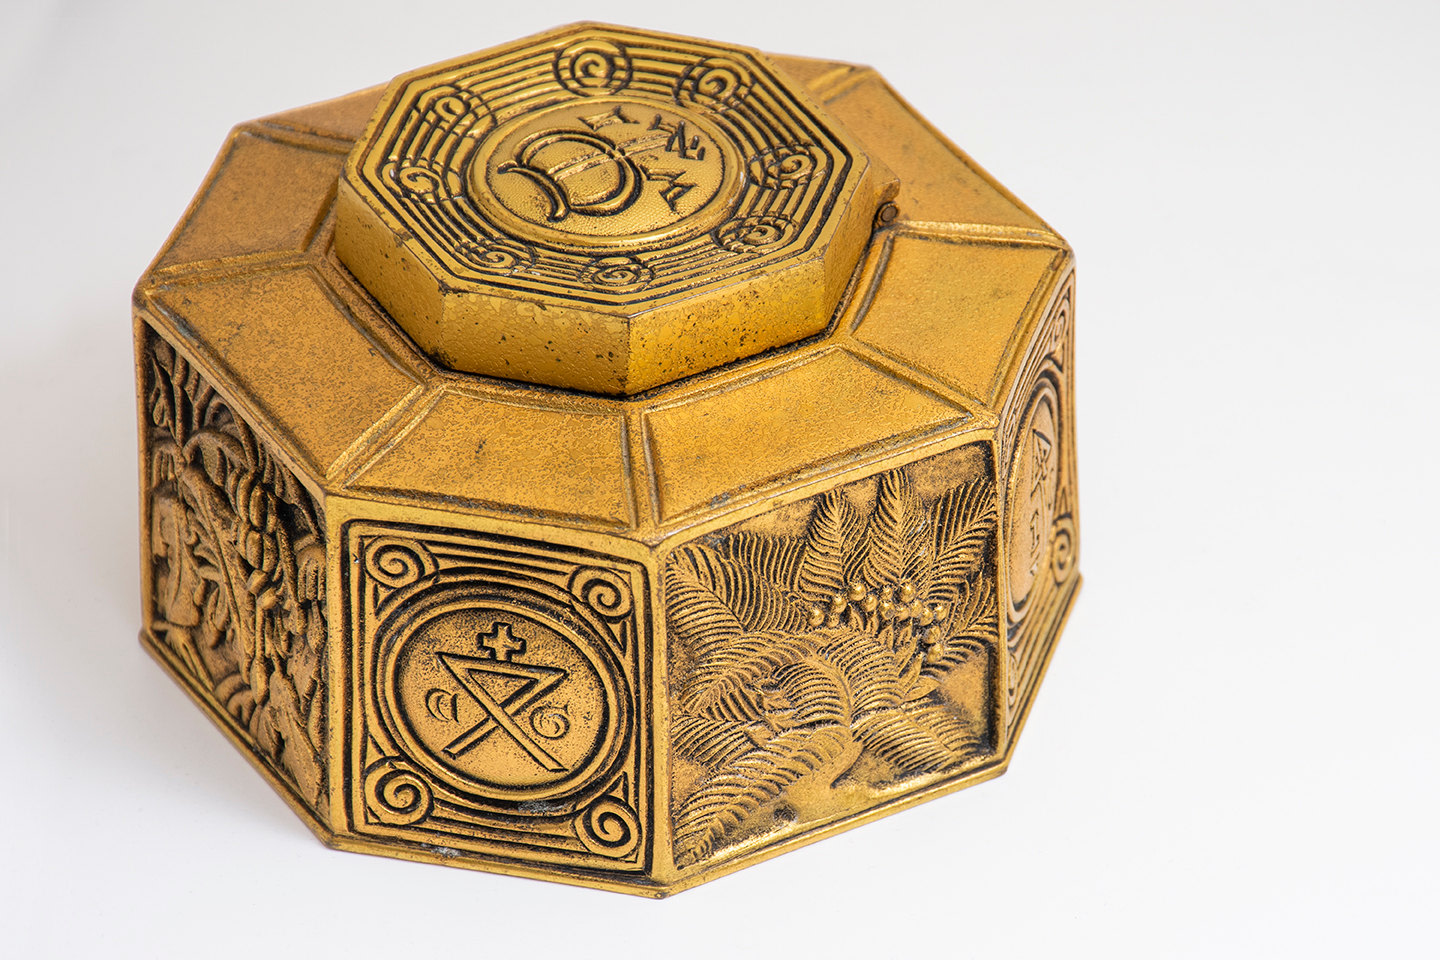 a low wide 8-sided inkwell by tiffany studios from the bookmark desk set, in gilt bronze, with decorations on the flat sides inspired by 15th century printer's marks, including botanical designs and monograms